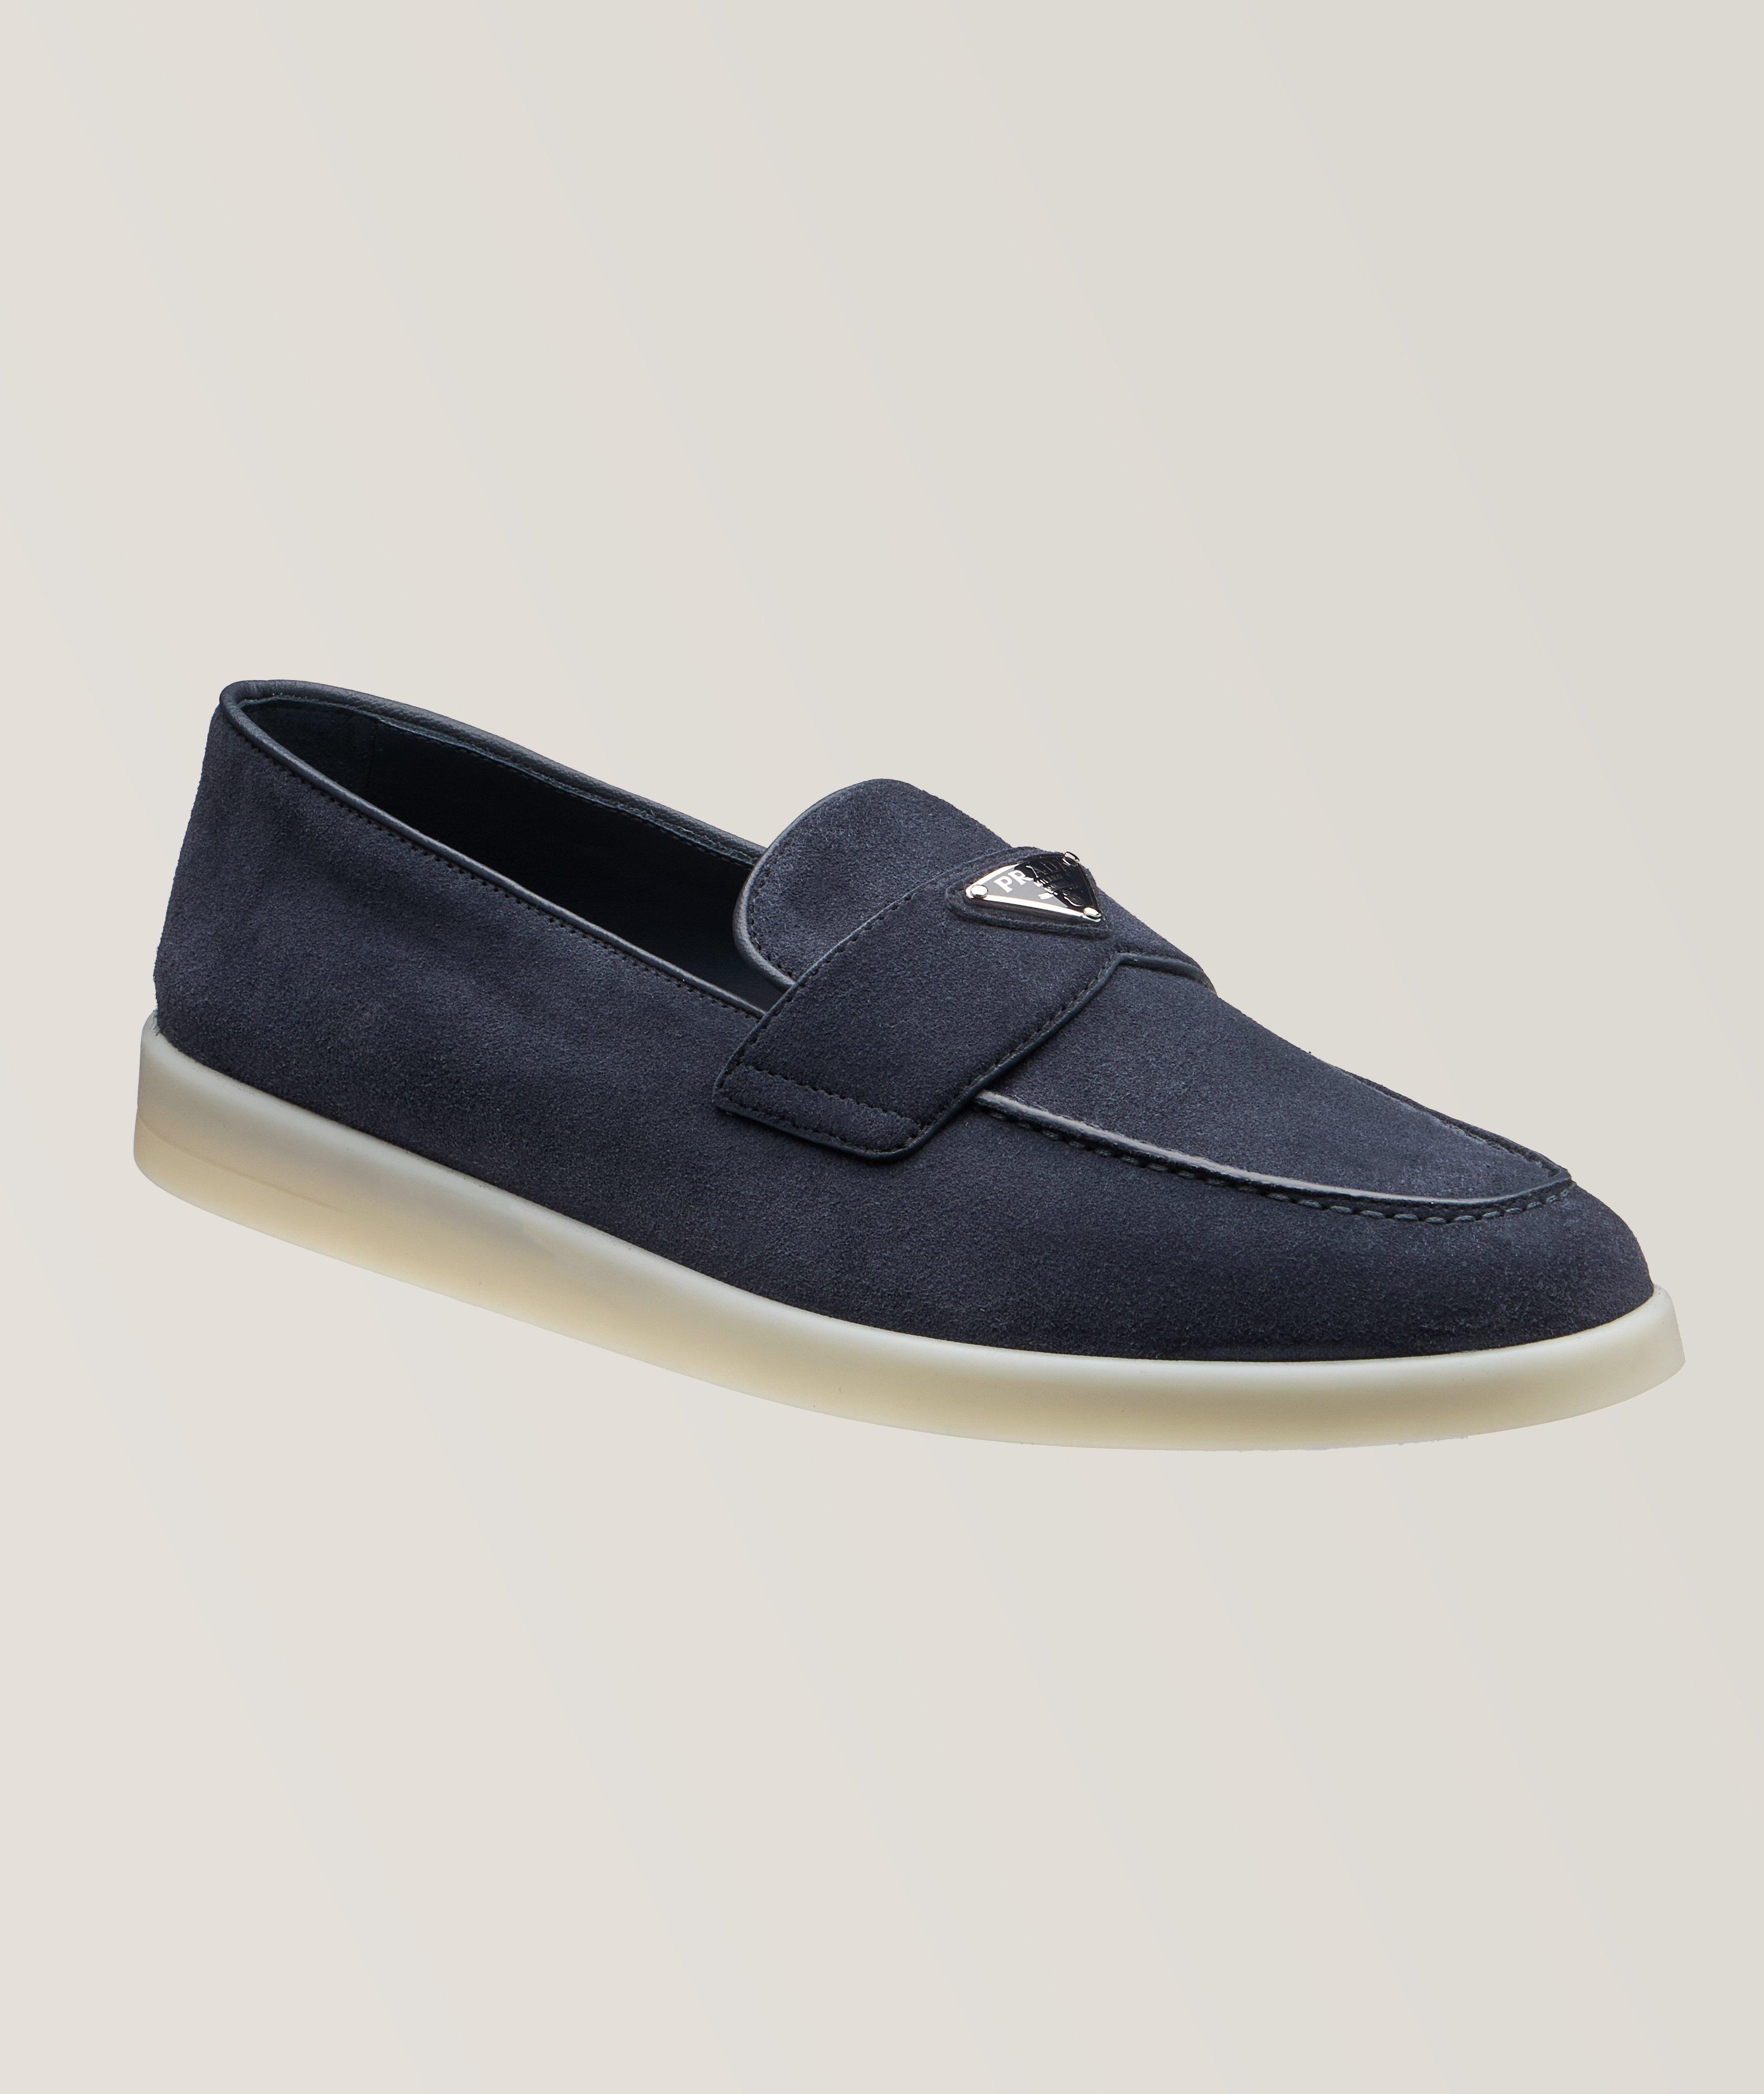 Saint Tropez Suede Leather Loafers image 0